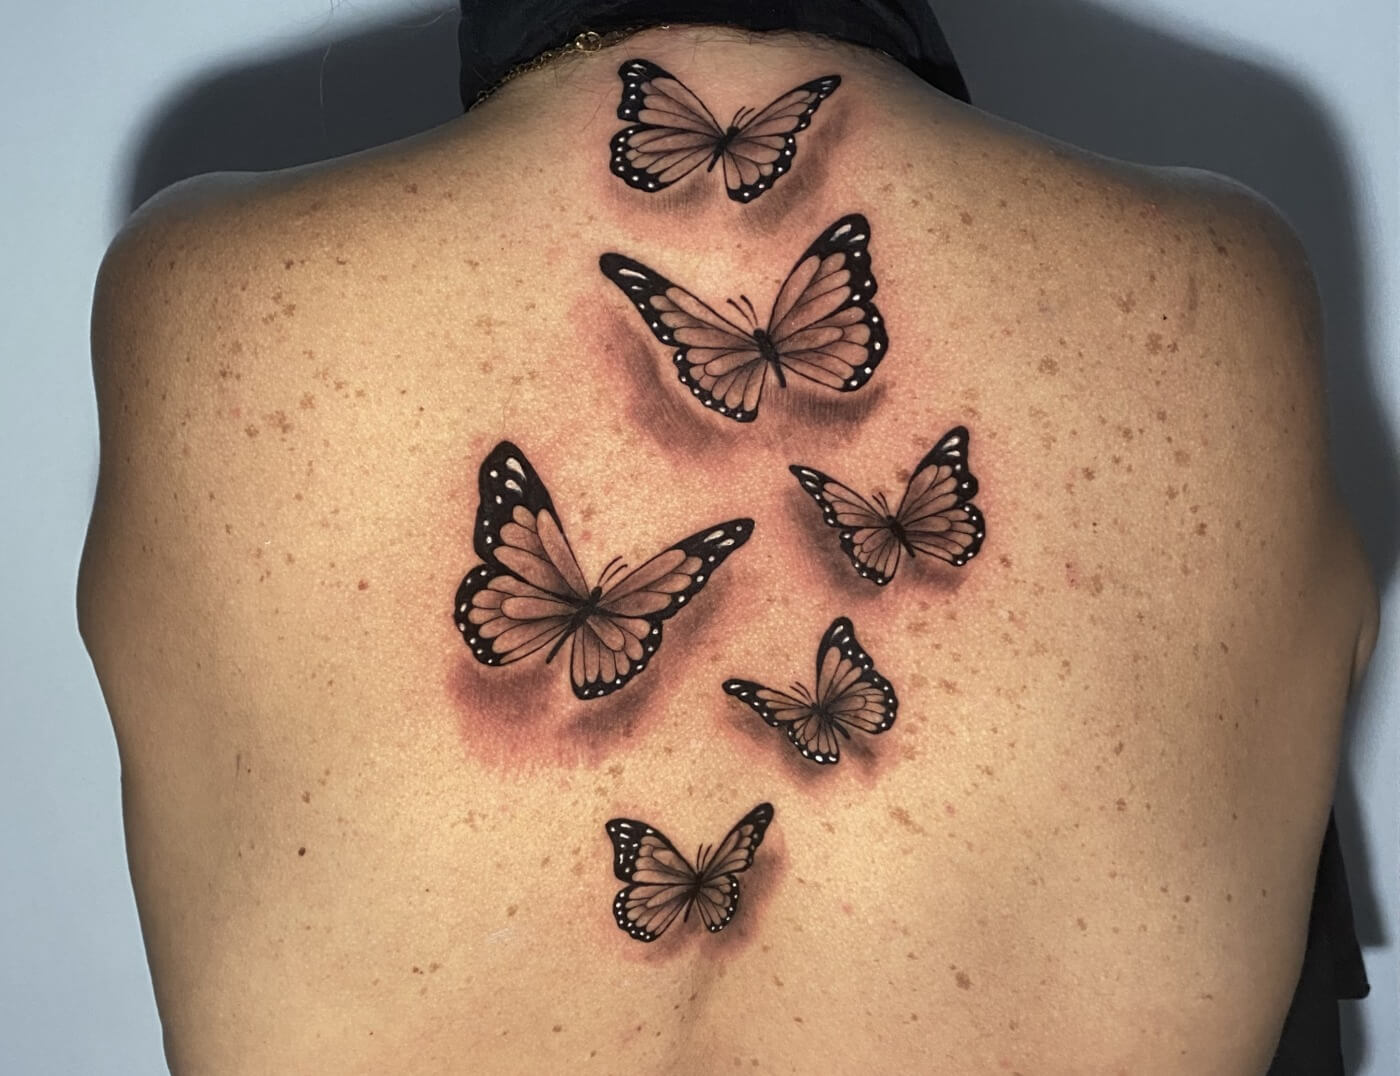 Butterfly Black & Grey Back Tattoo by Rene Cristobal, A guest Artist At Iron Palm Tattoos. Butterfly tattoos are poplar representations of growth and change. Call 404-973-7828 or stop by for a free consultation. Walk ins are welcome.